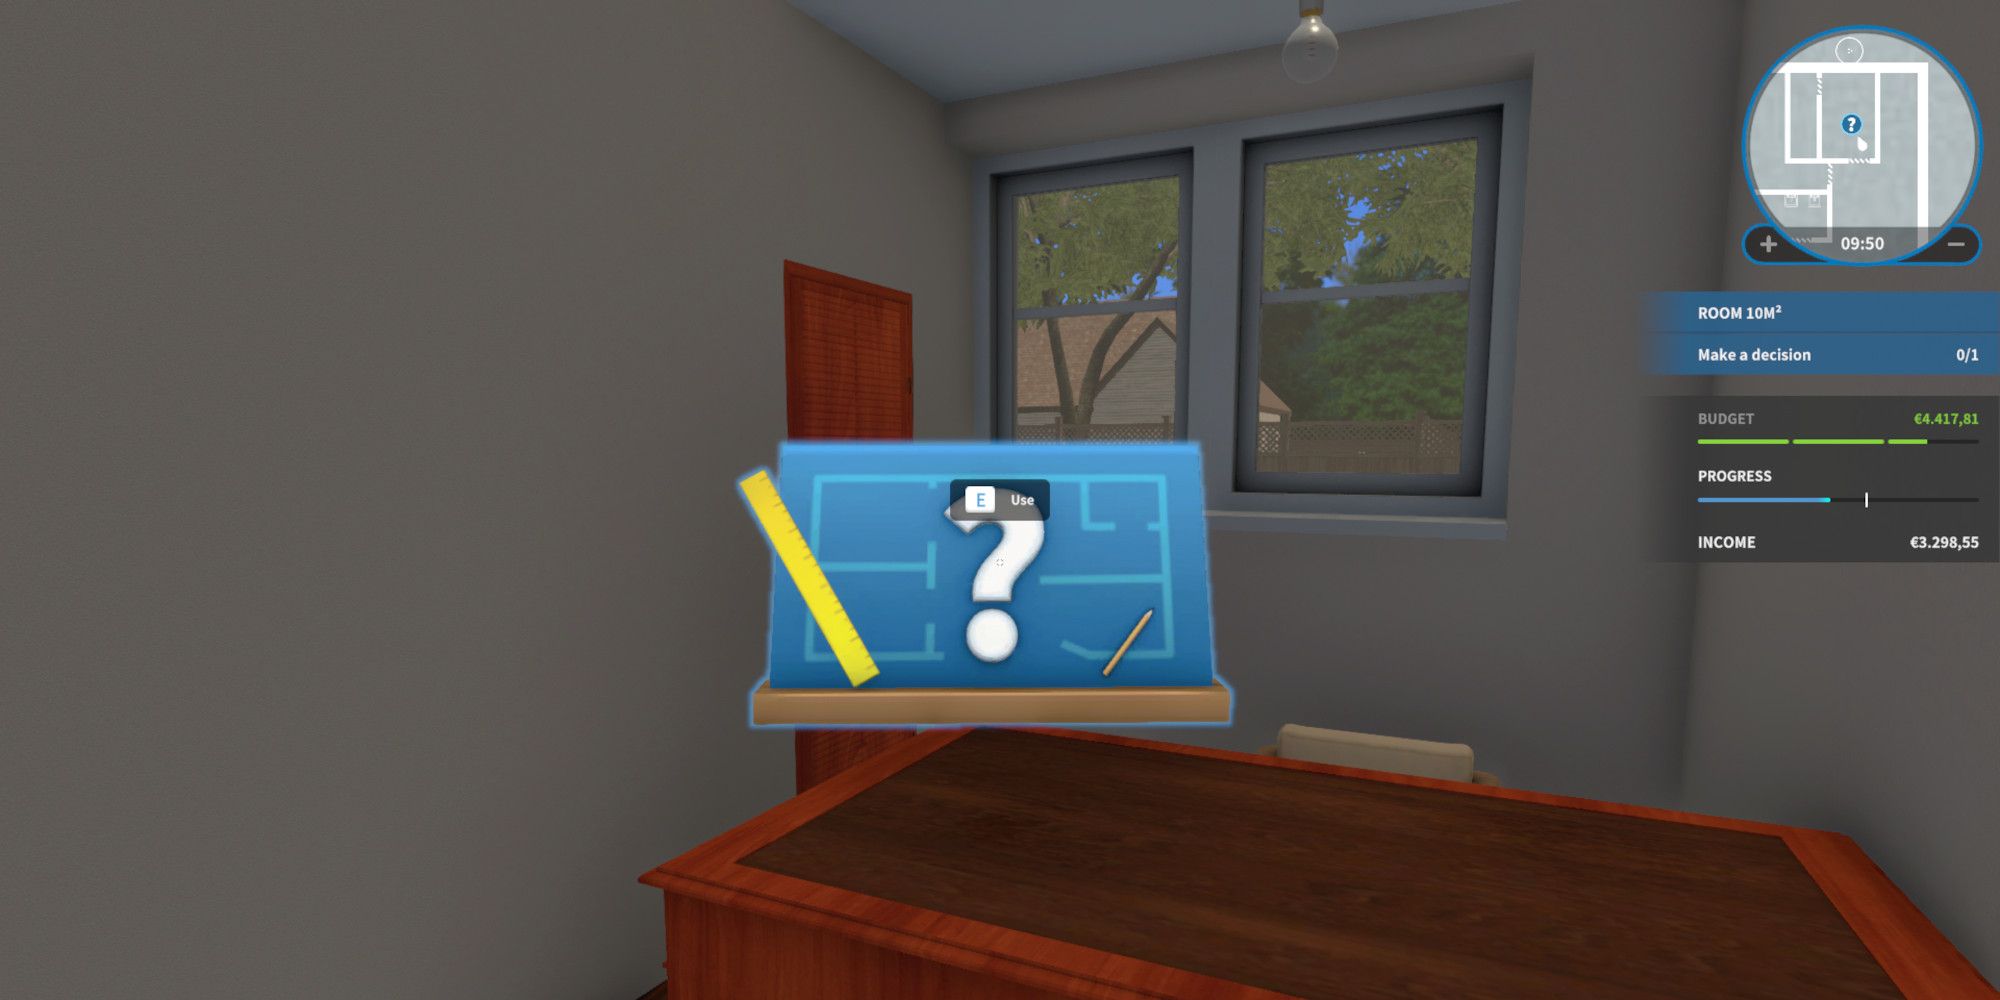 Decision tool in the HGTV dlc for House Flipper